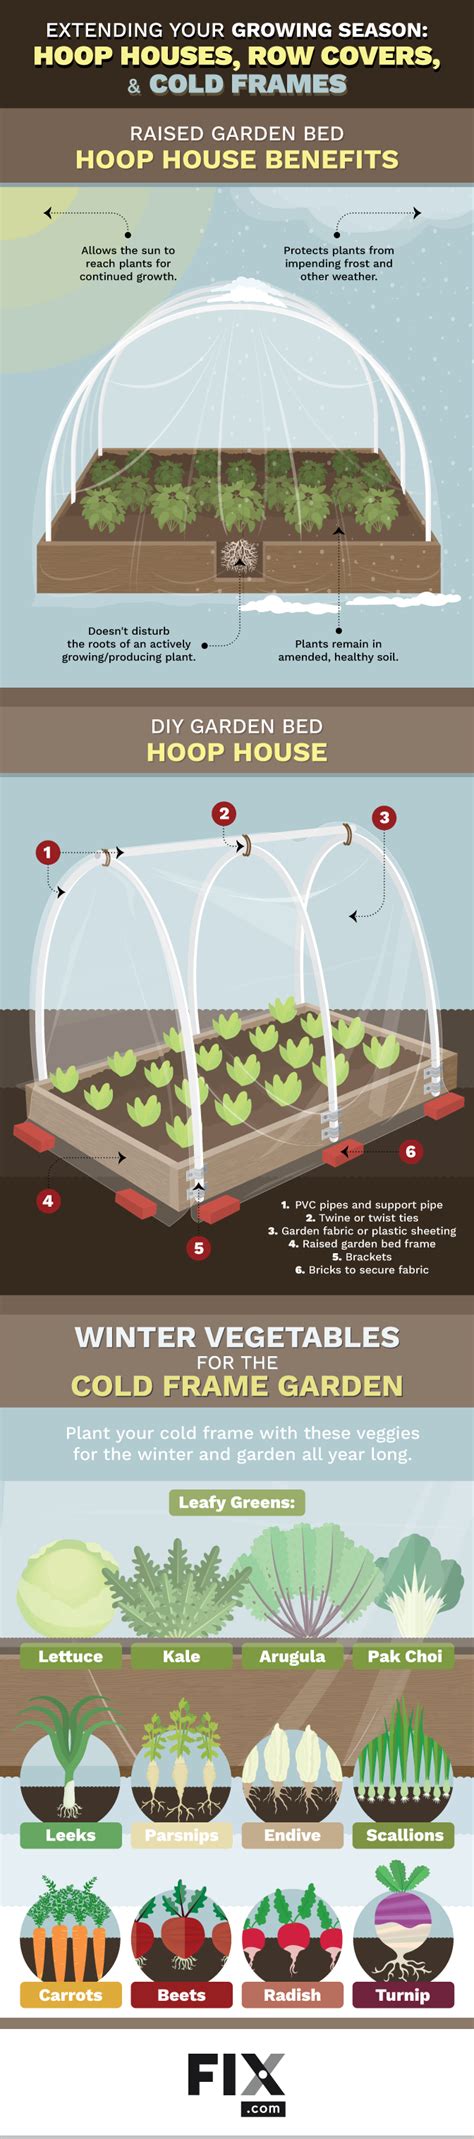 Extending Your Growing Season Hoop Houses Row Covers And Cold Frames